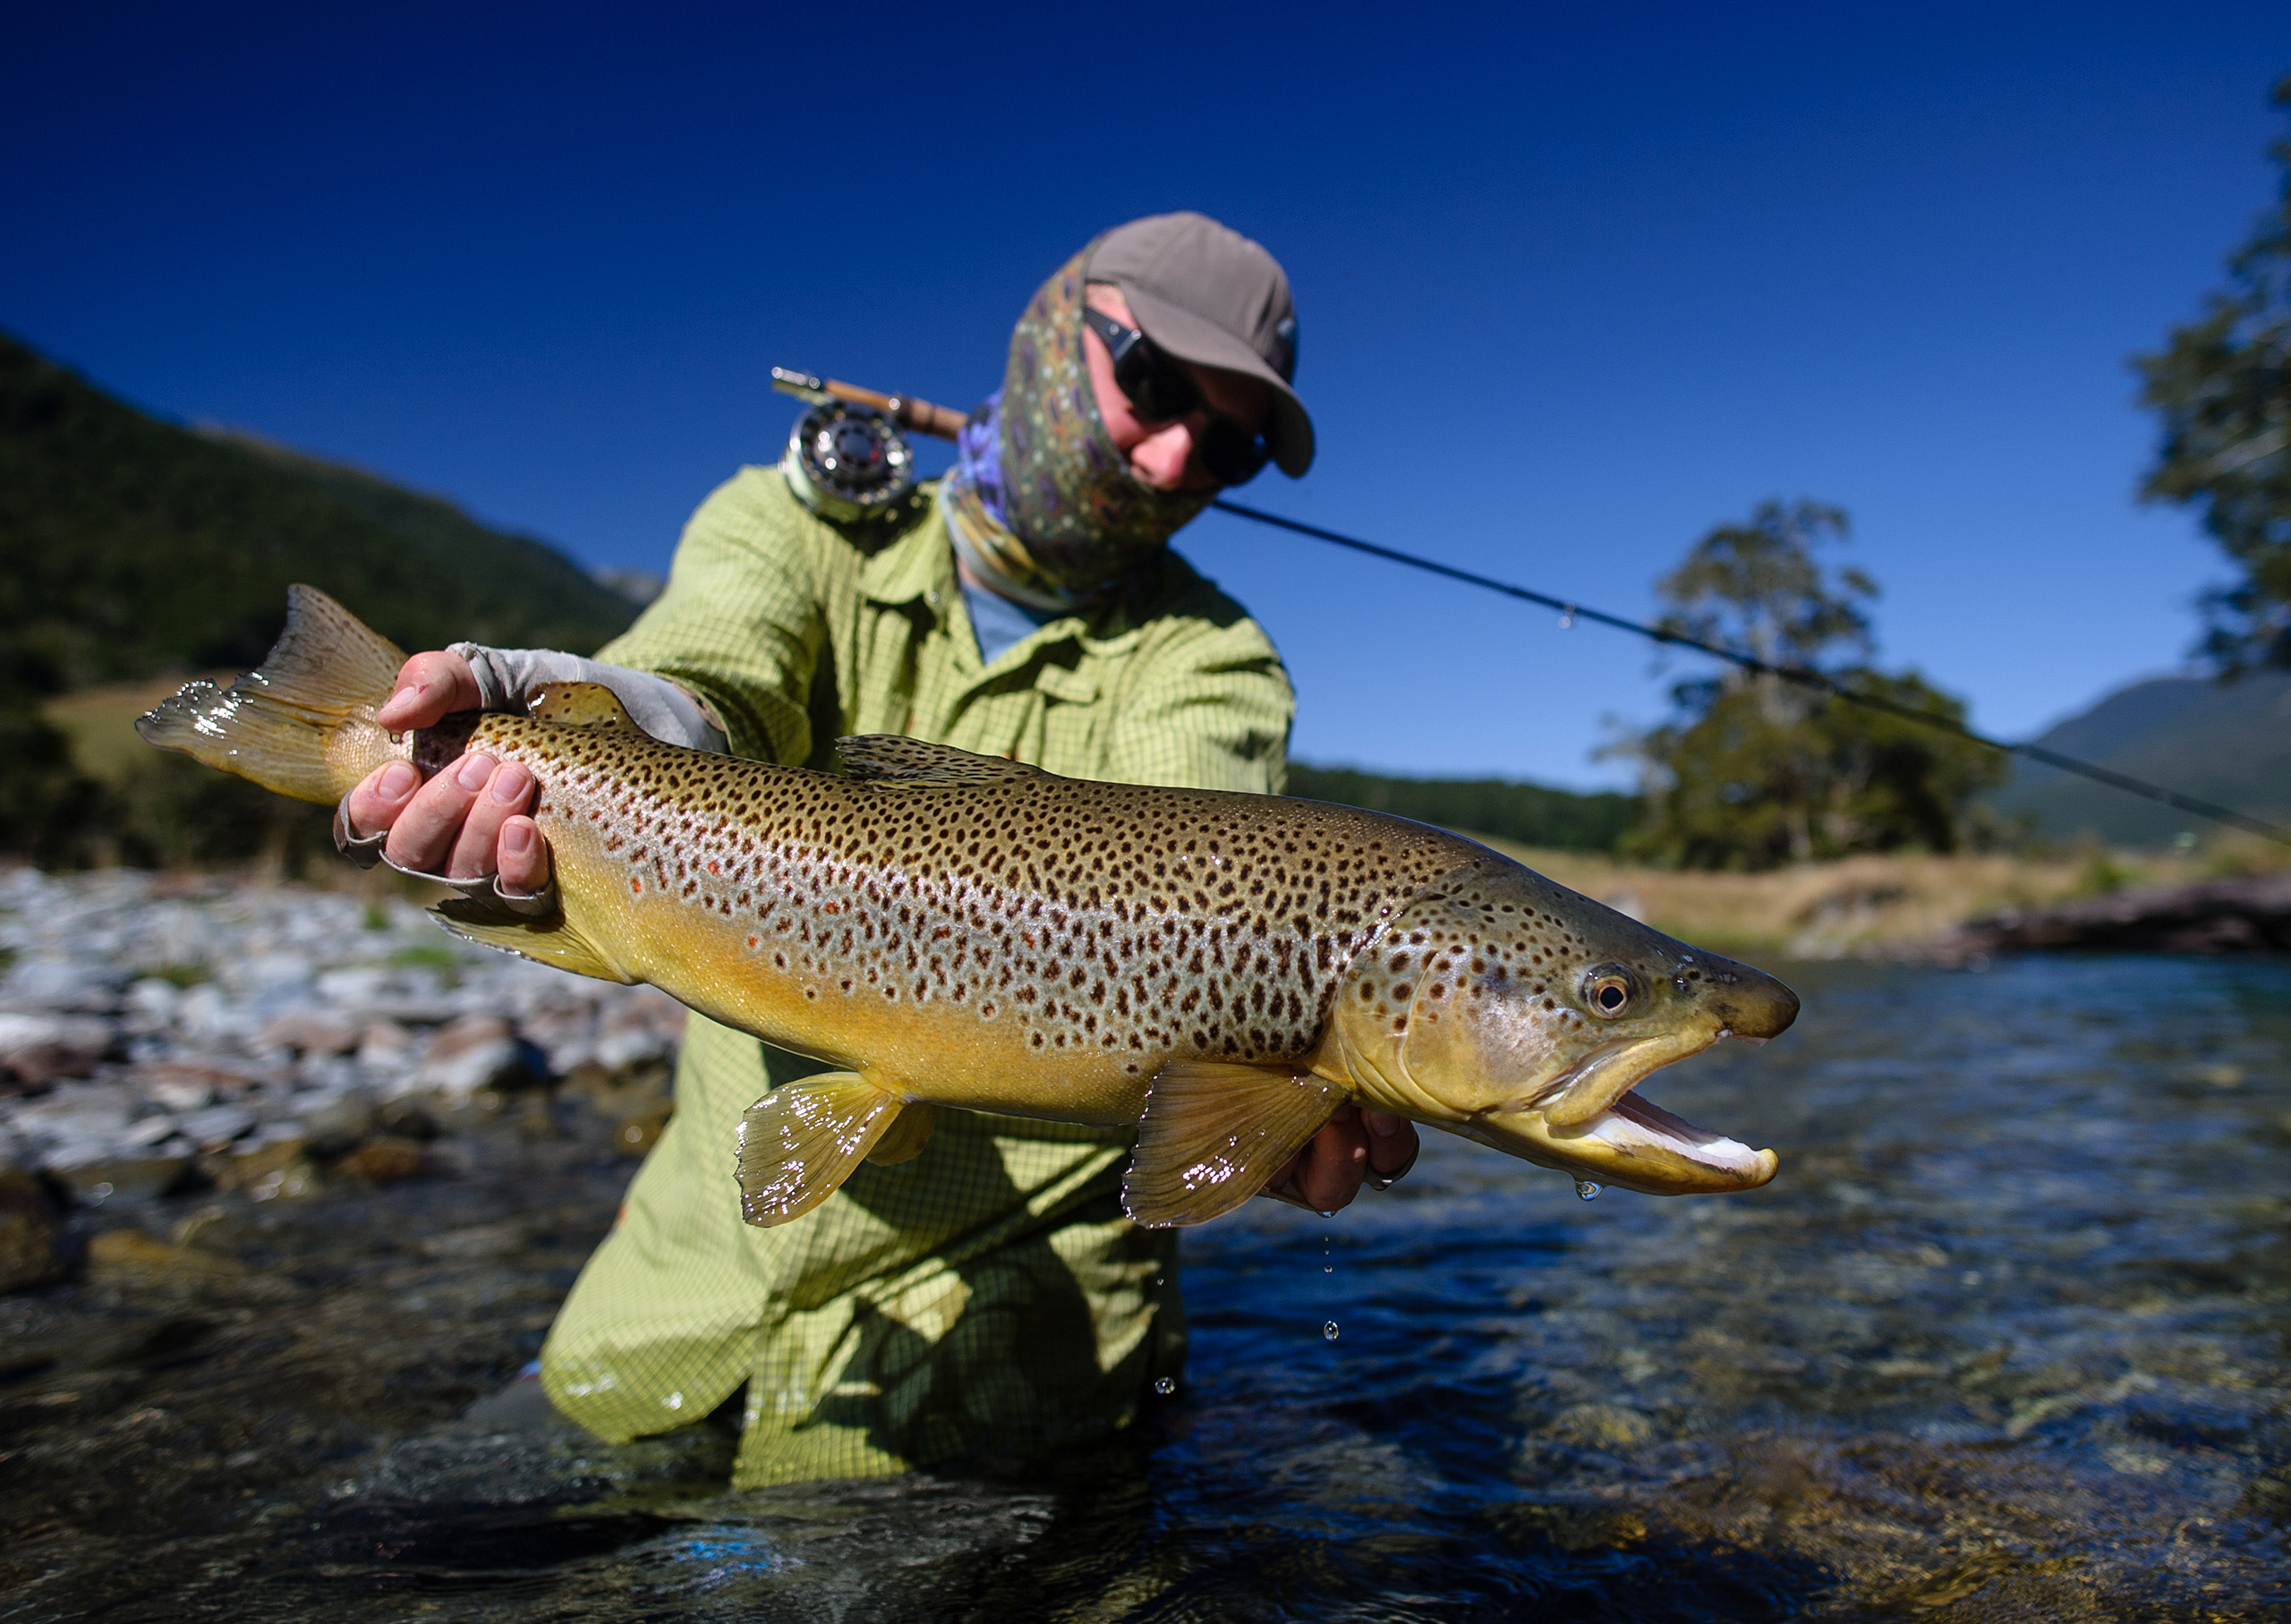 New Zealand - A Fly Fishing dream come true